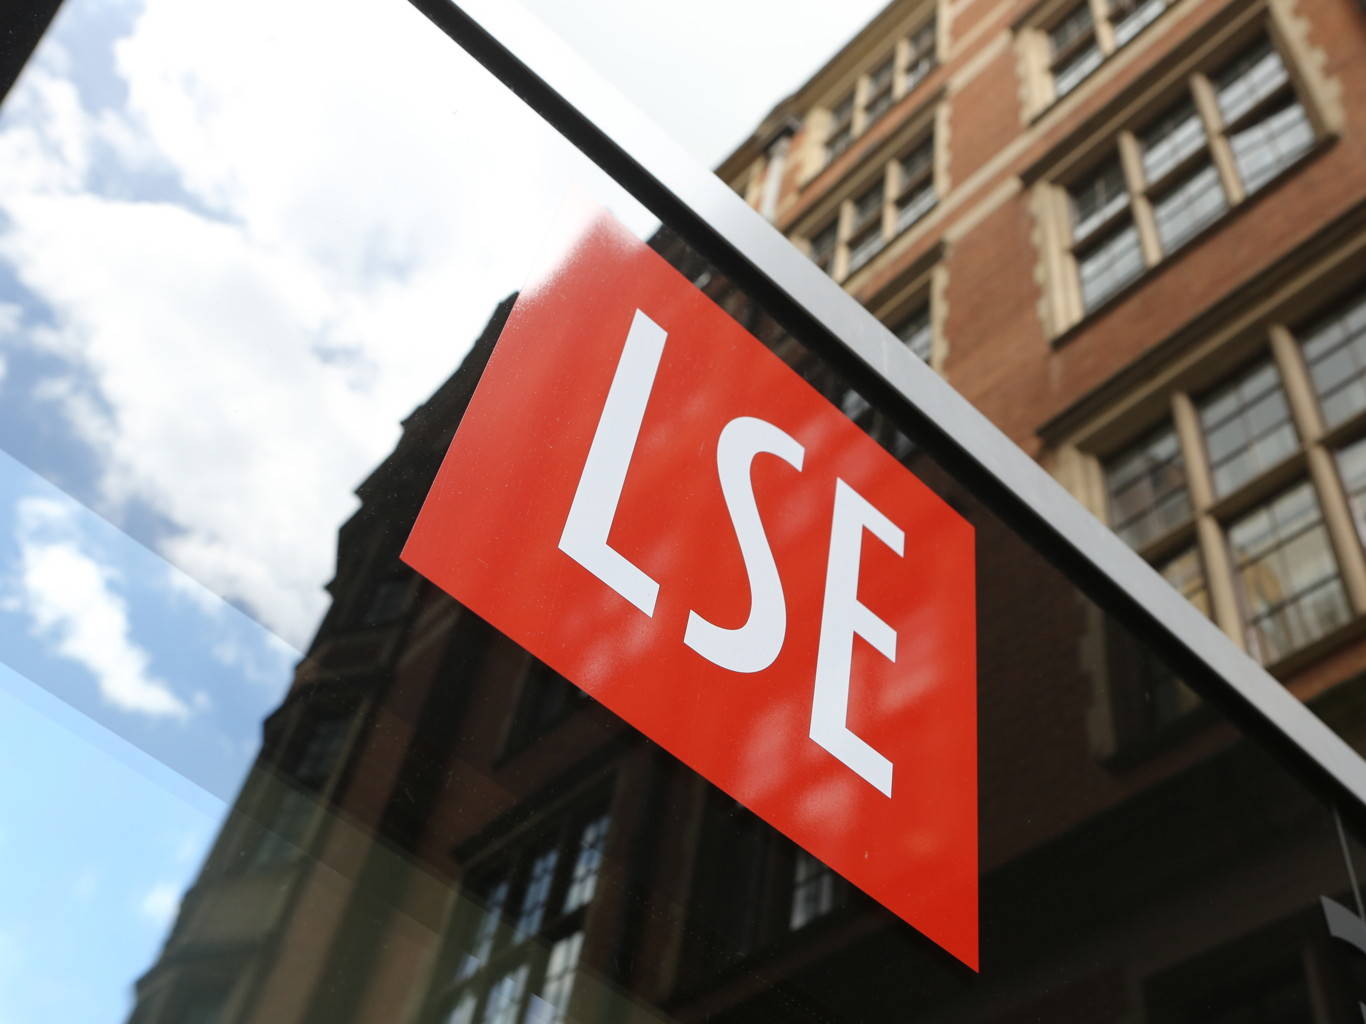 Red LSE Logo on the wall with red building in the diagonal background